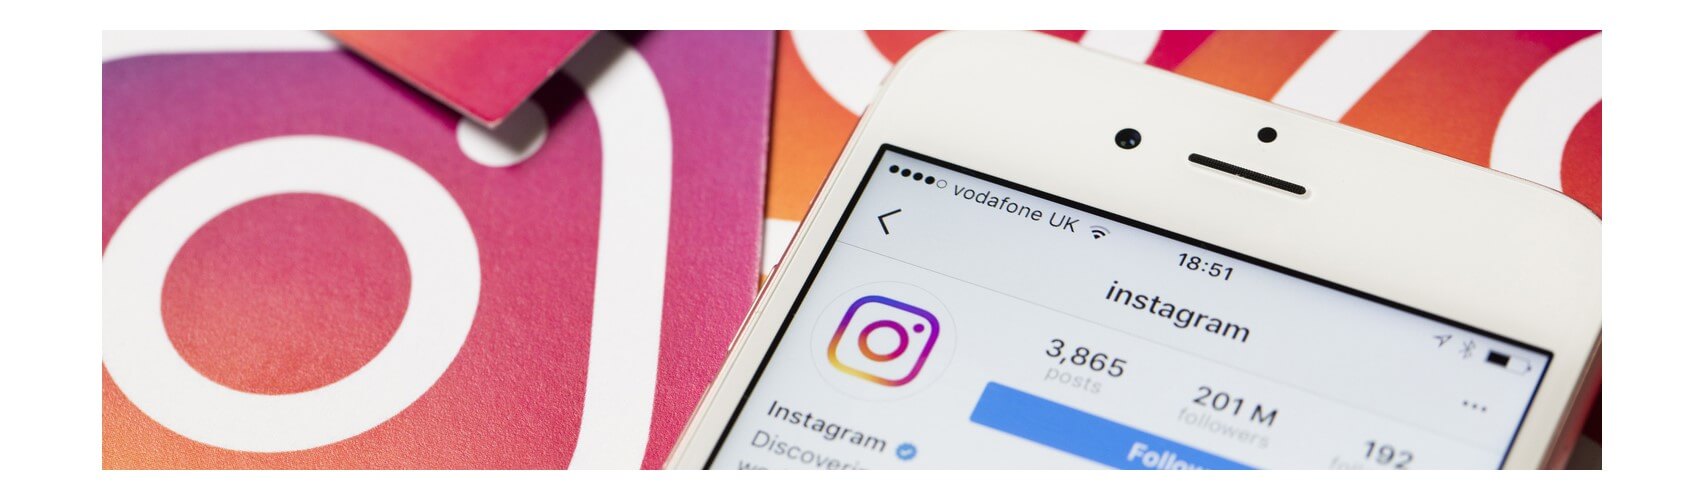 Get Successful Hacking Tips from InstaPortal Instagram Account Hacker